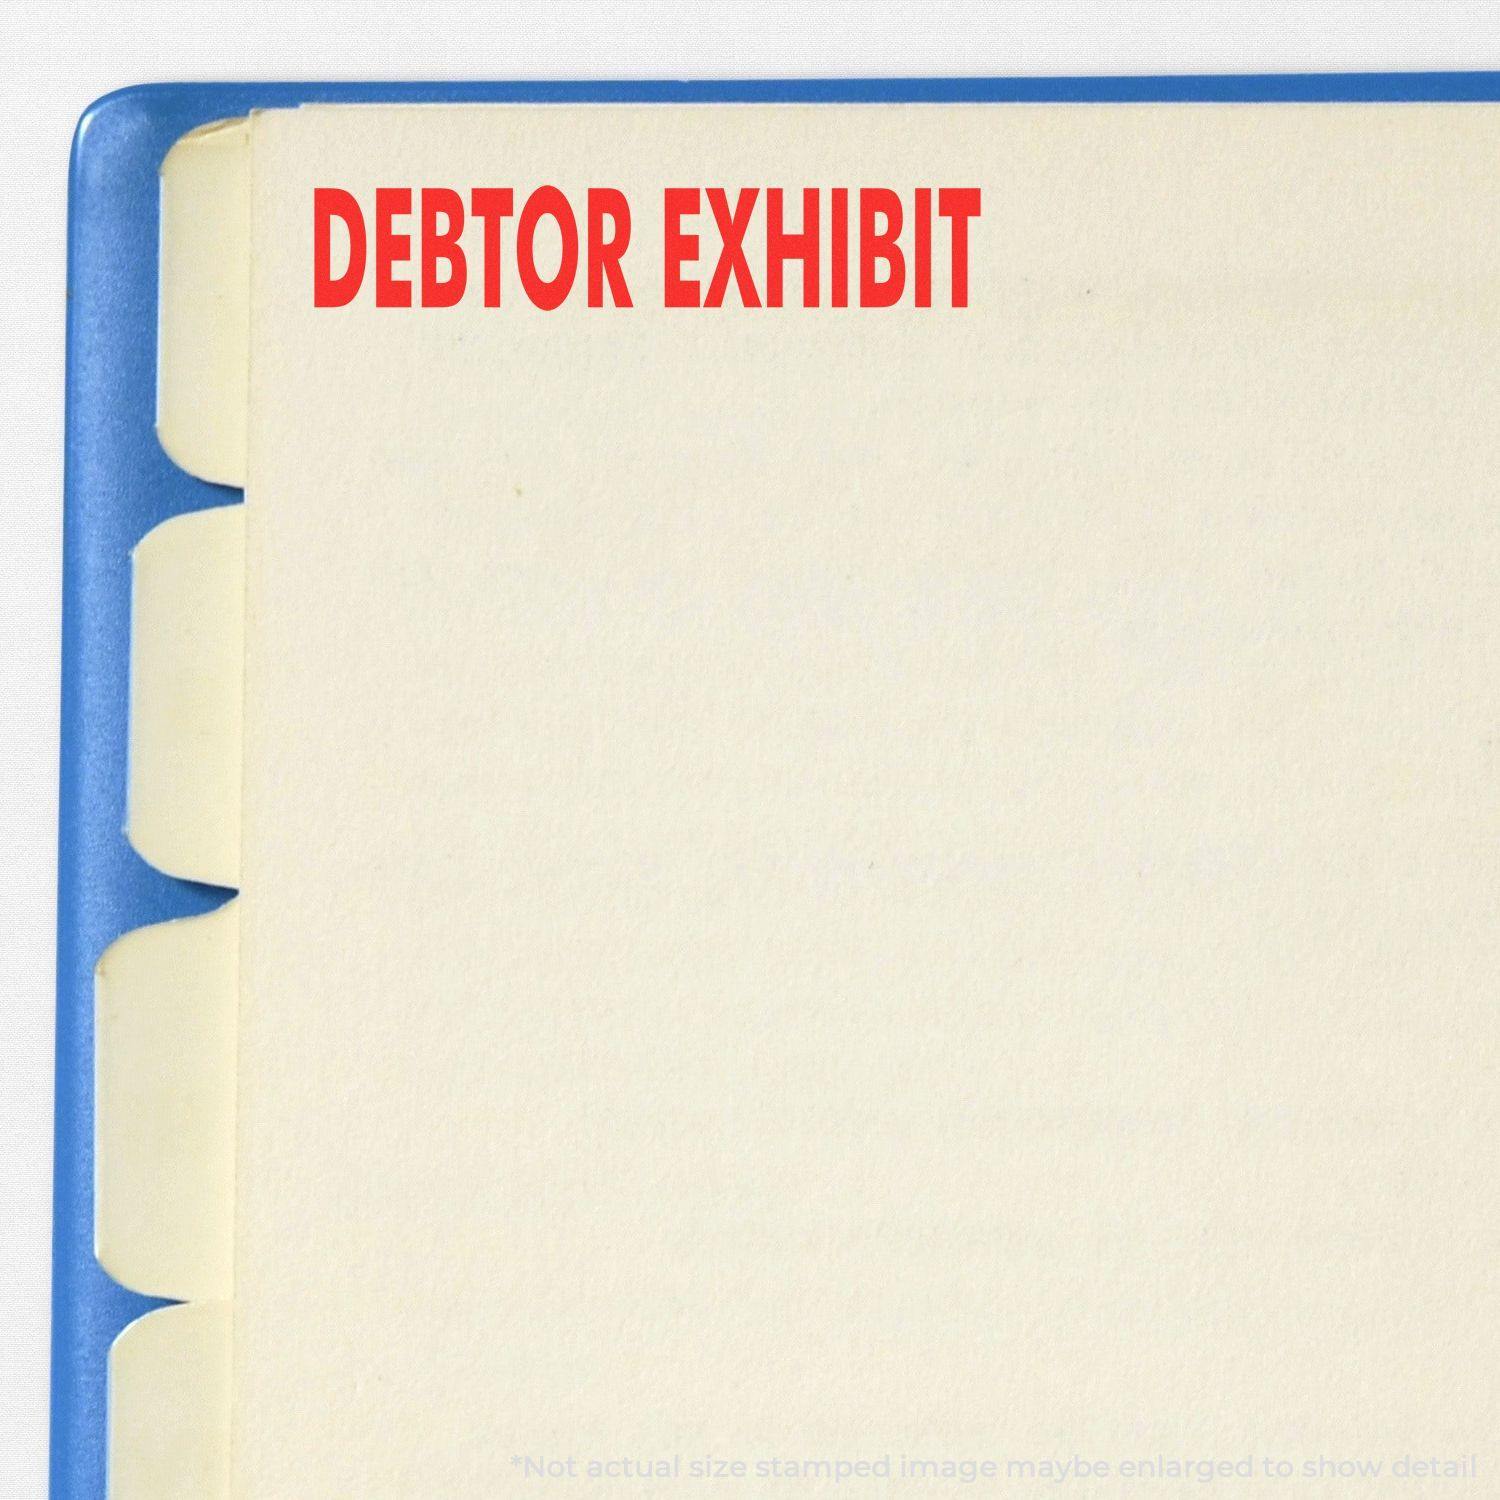 A stock office pre-inked stamp with a stamped image showing how the text "DEBTOR EXHIBIT" is displayed after stamping.